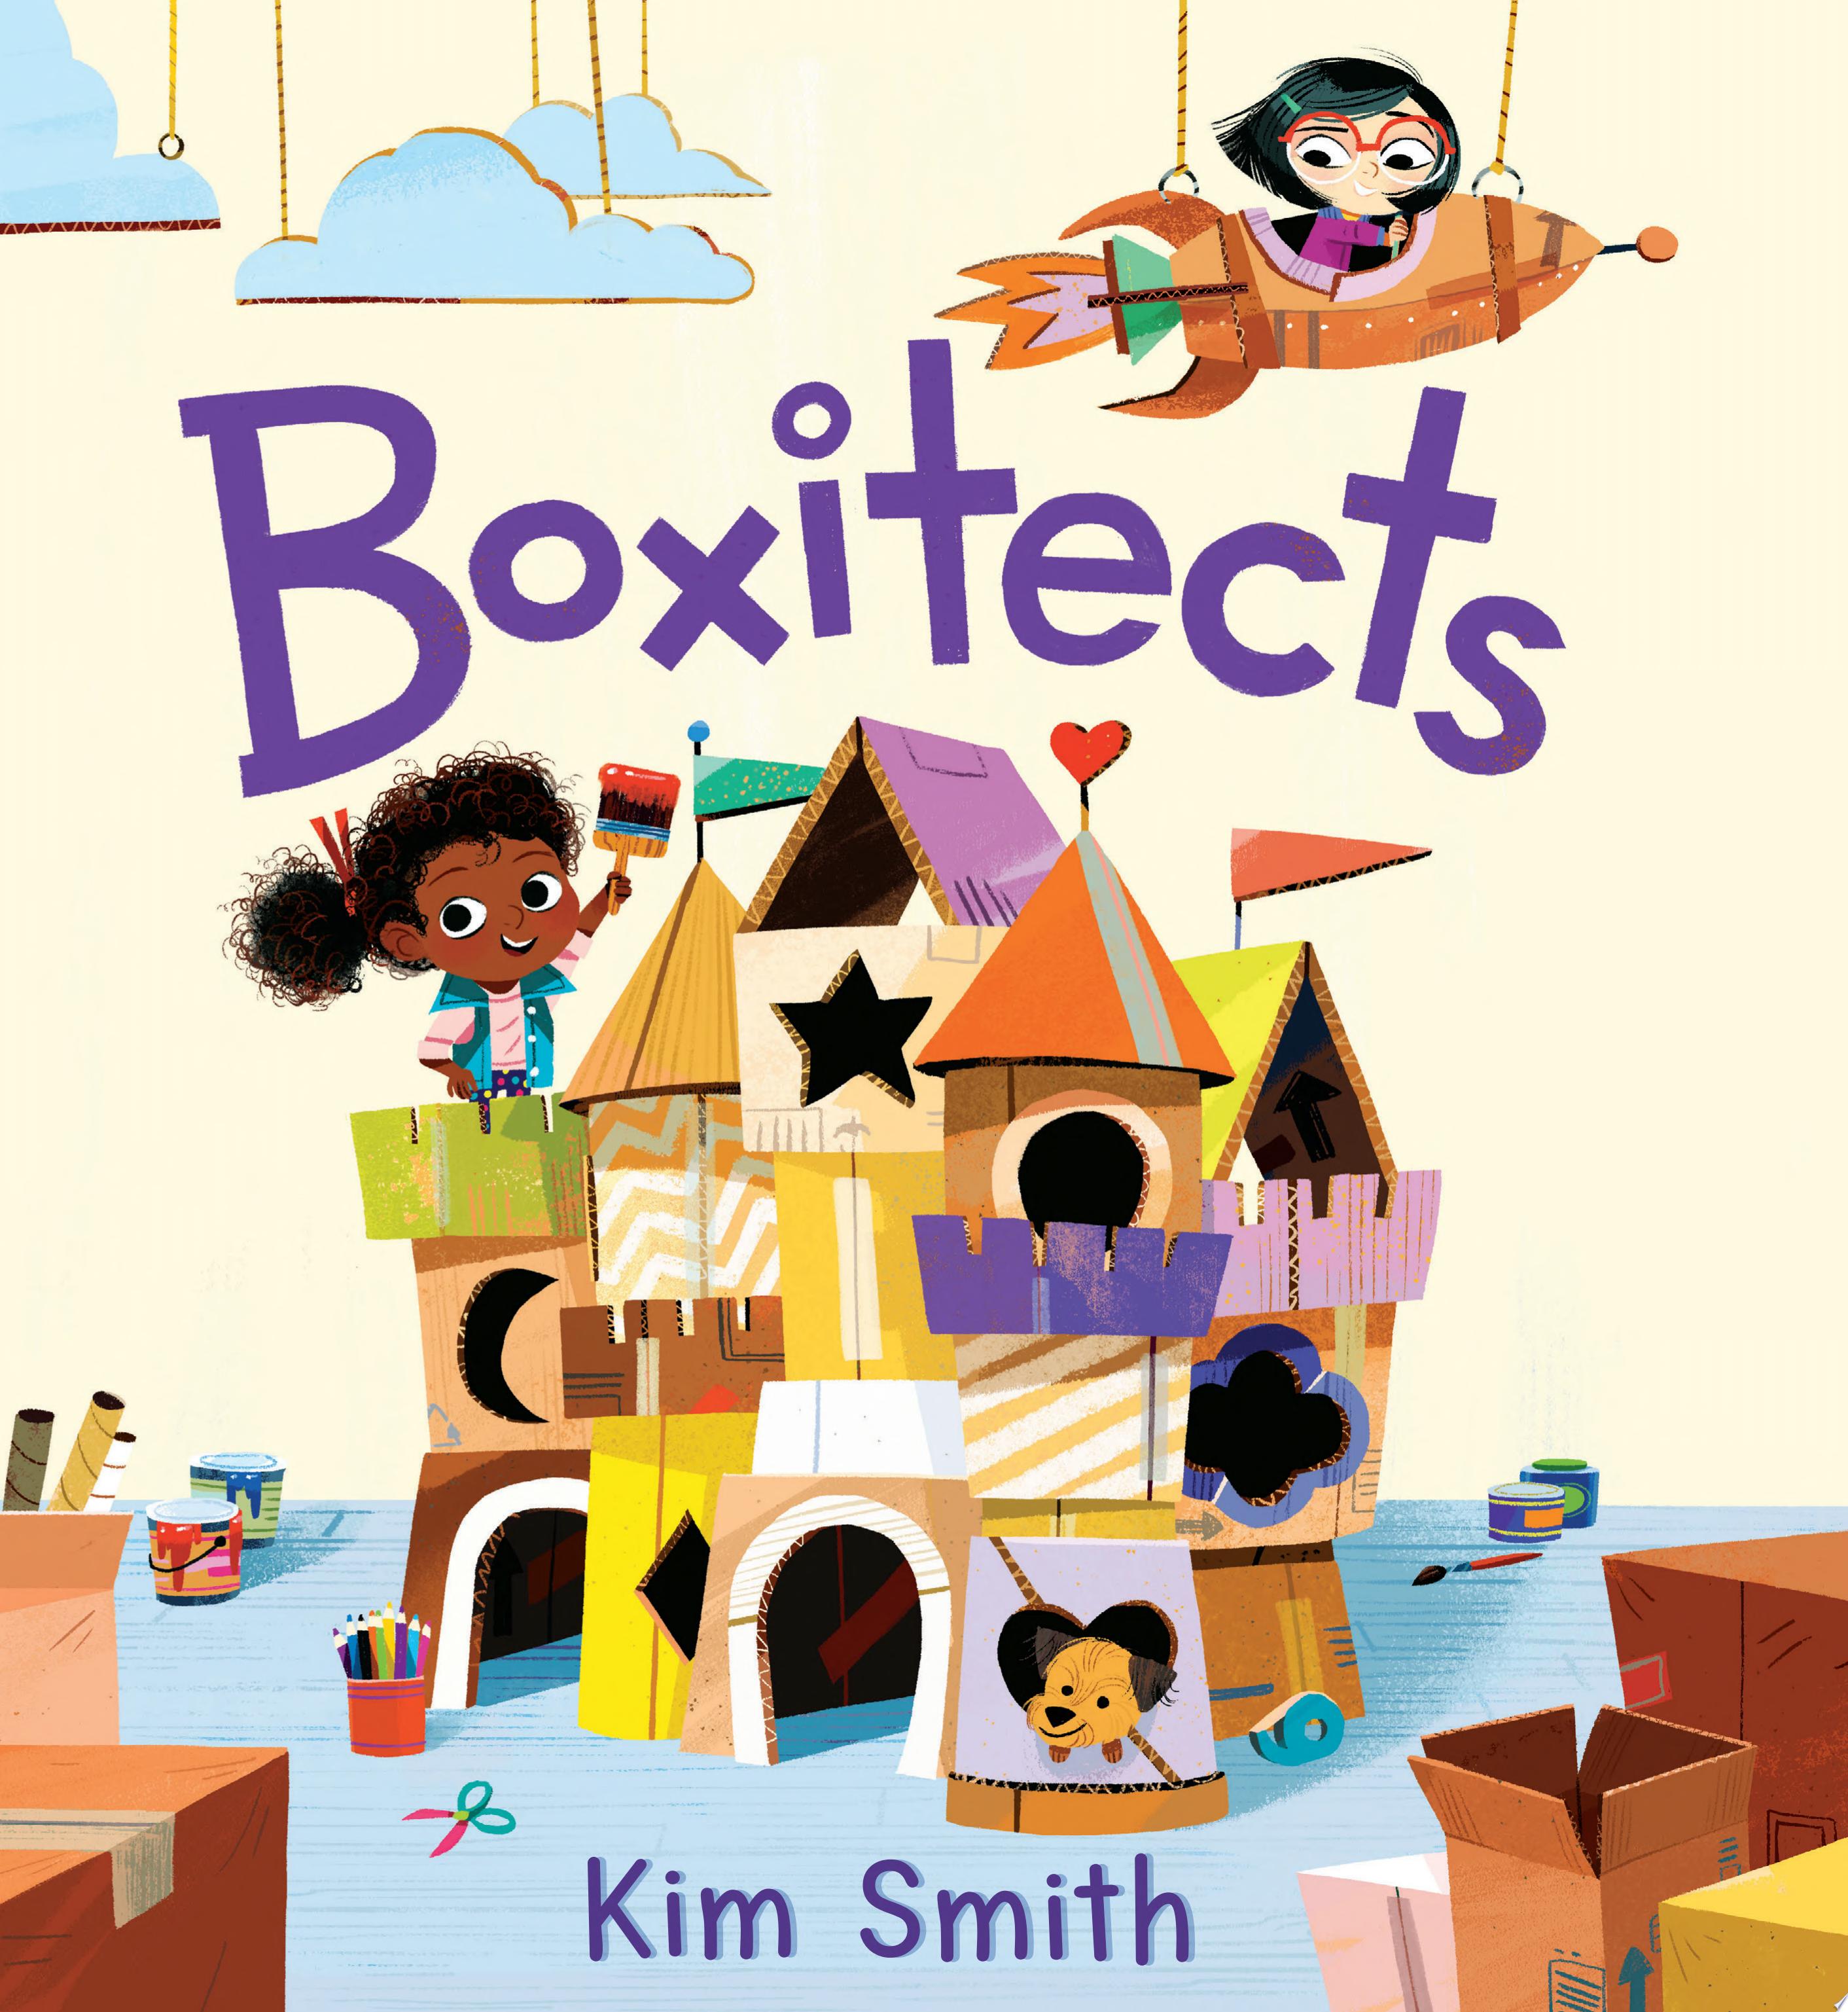 Image for "Boxitects"